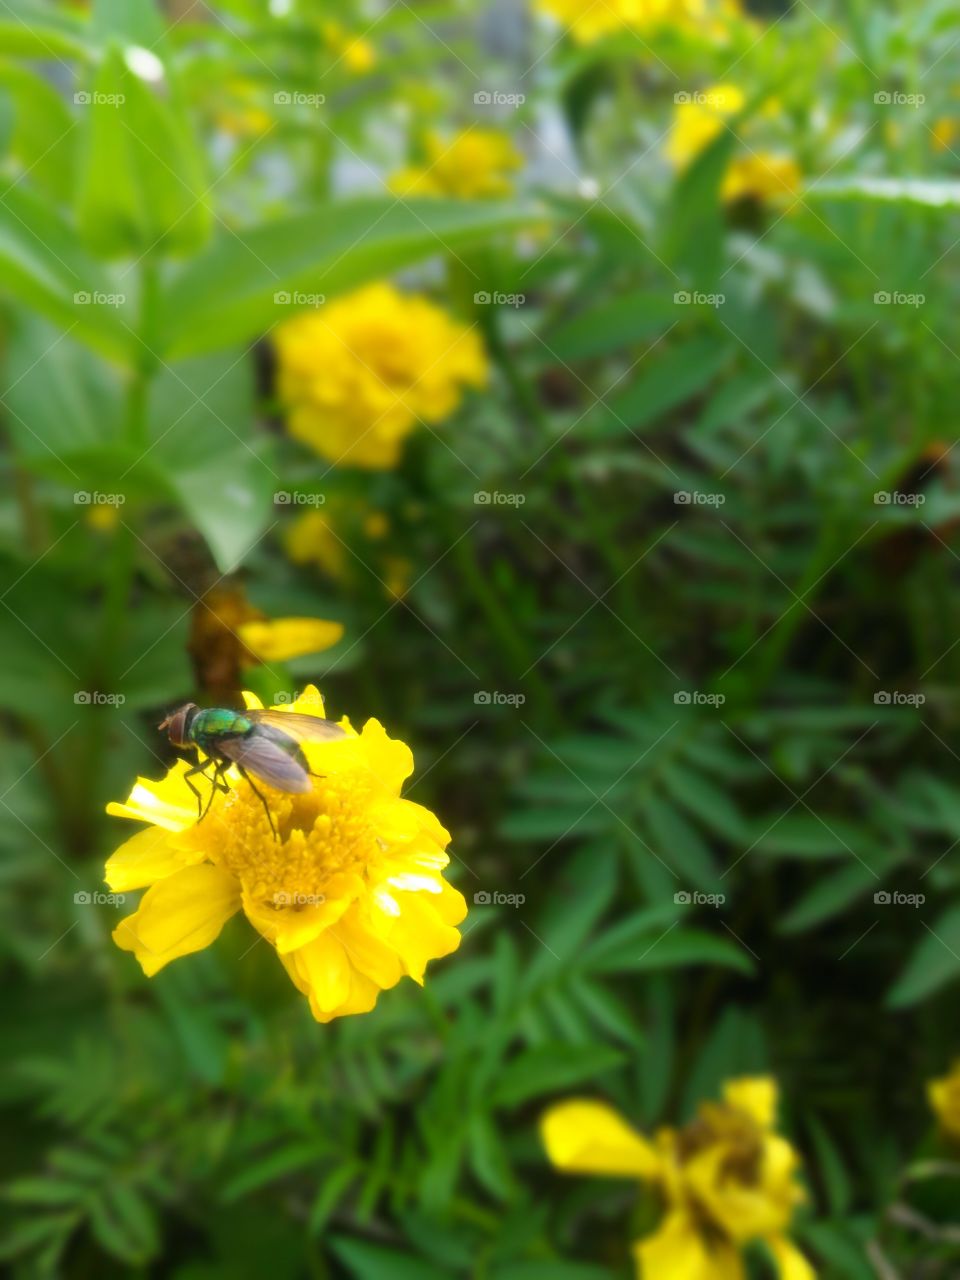 flies and yellow flowers